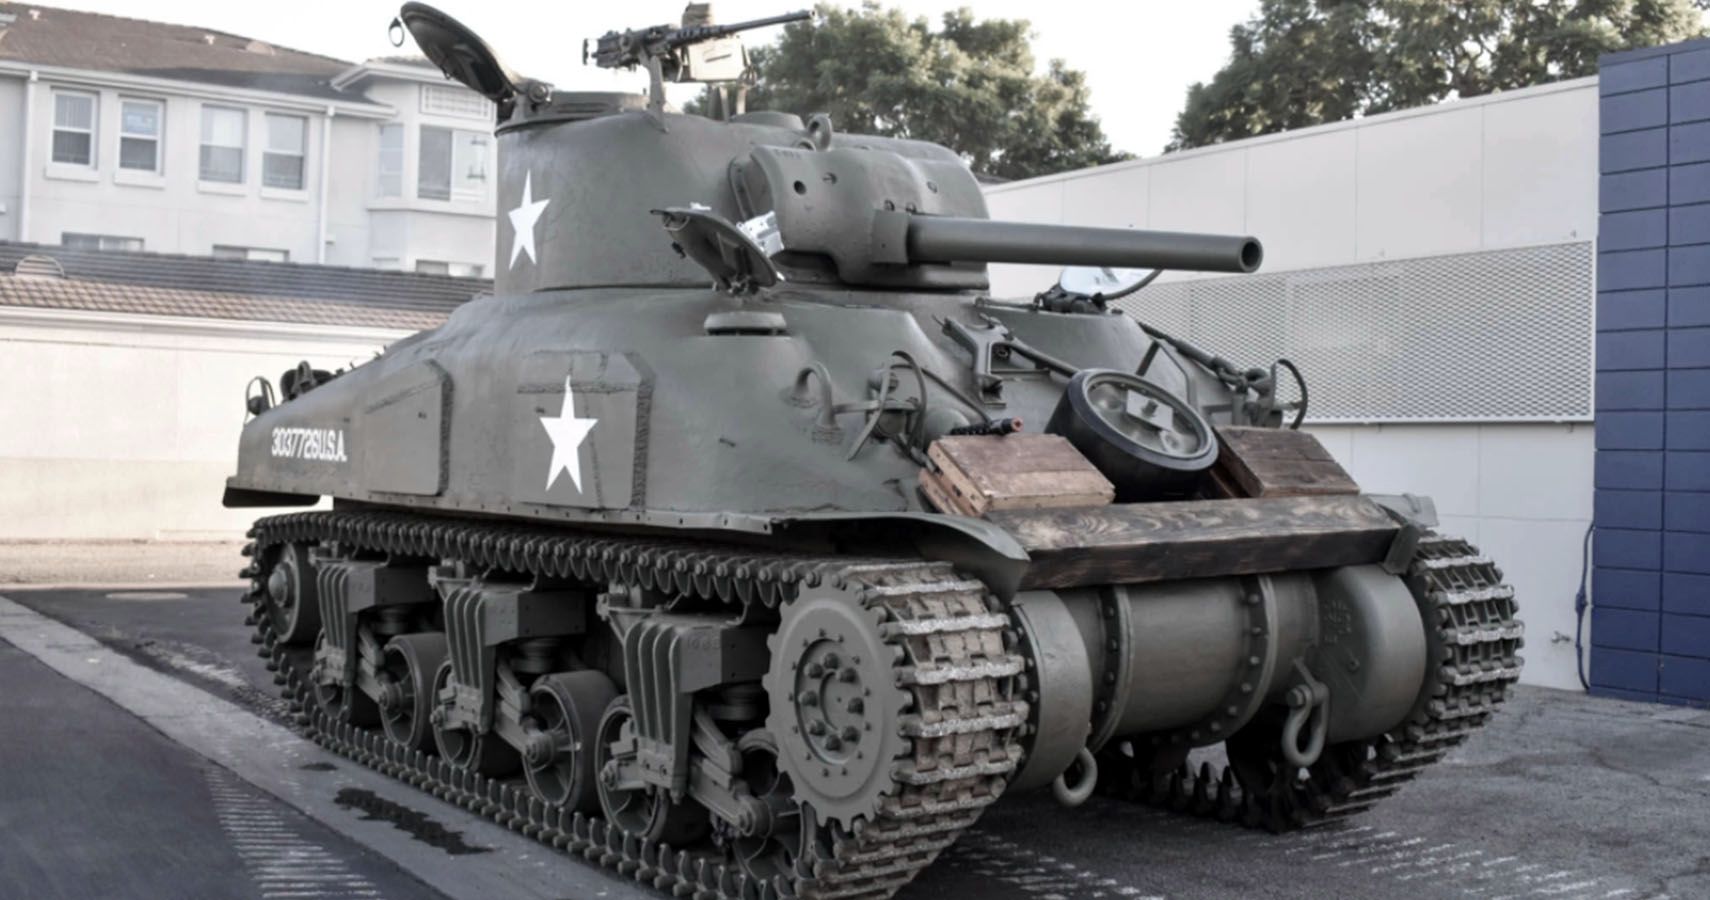 modern military tanks for sale